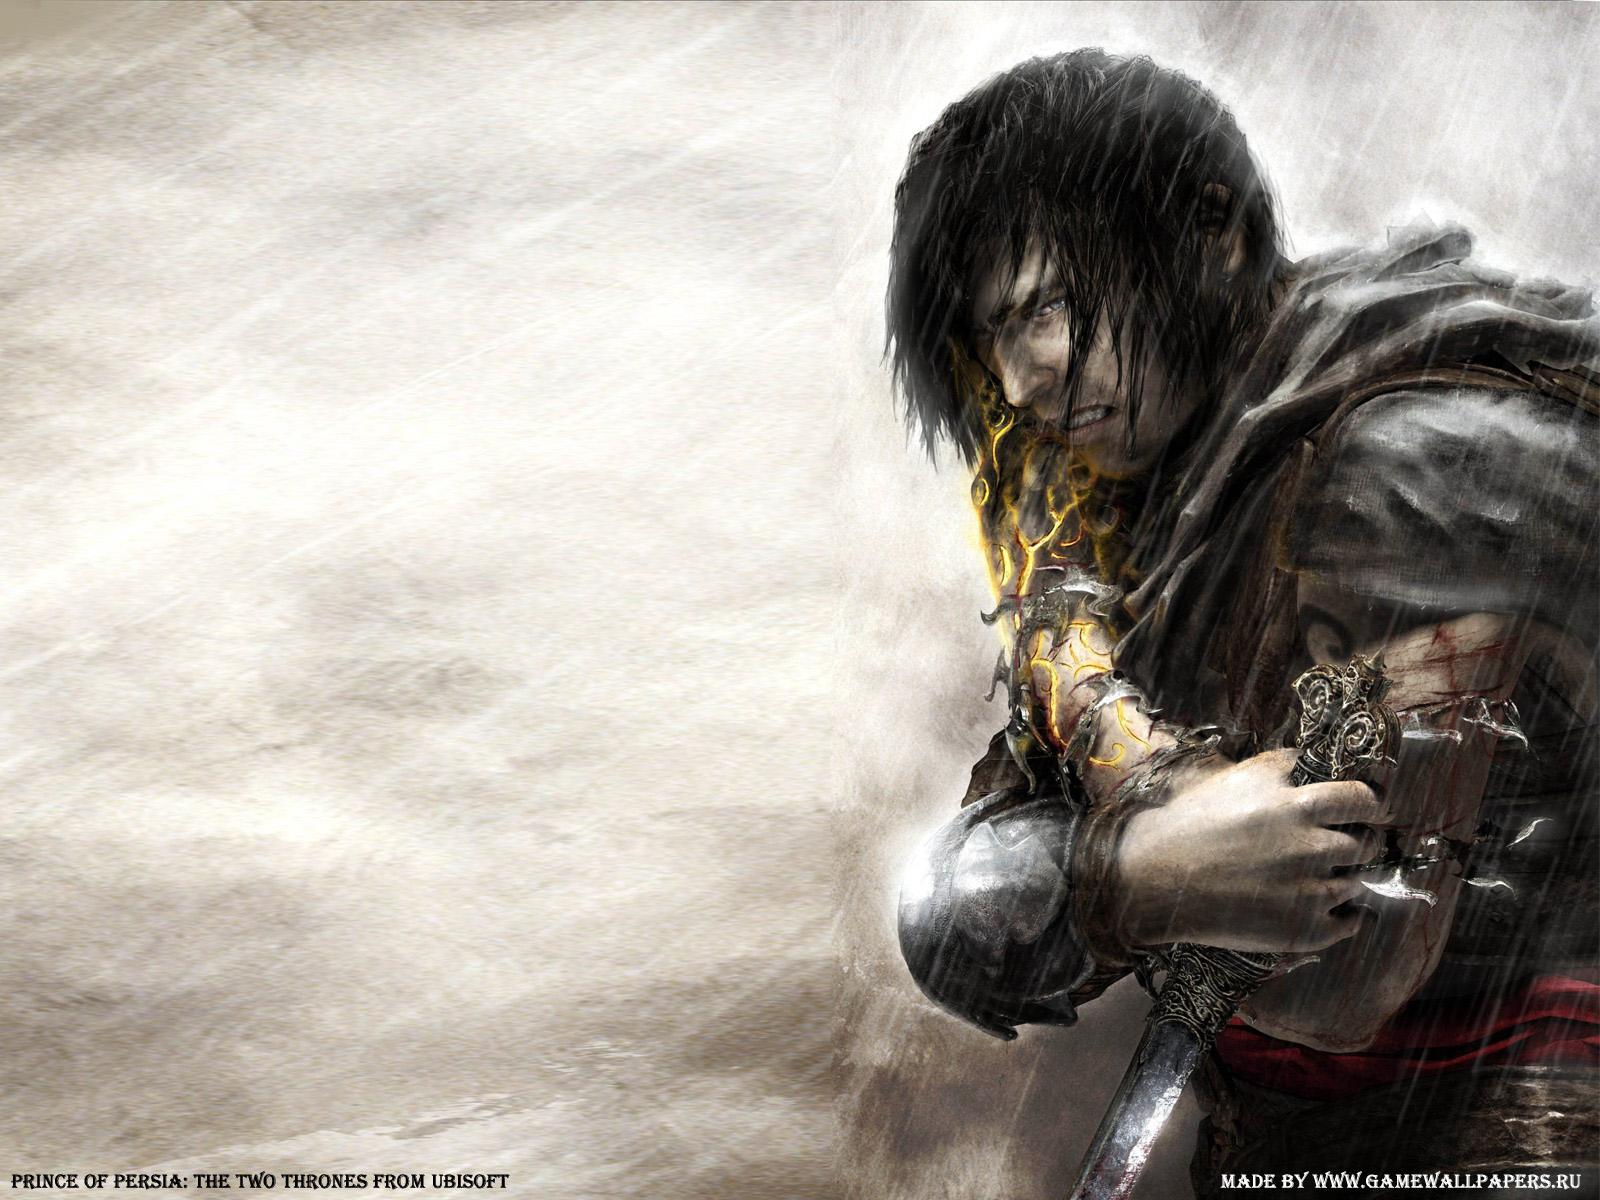  wallpapers prince of persia wallpapers prince of persia wallpapers